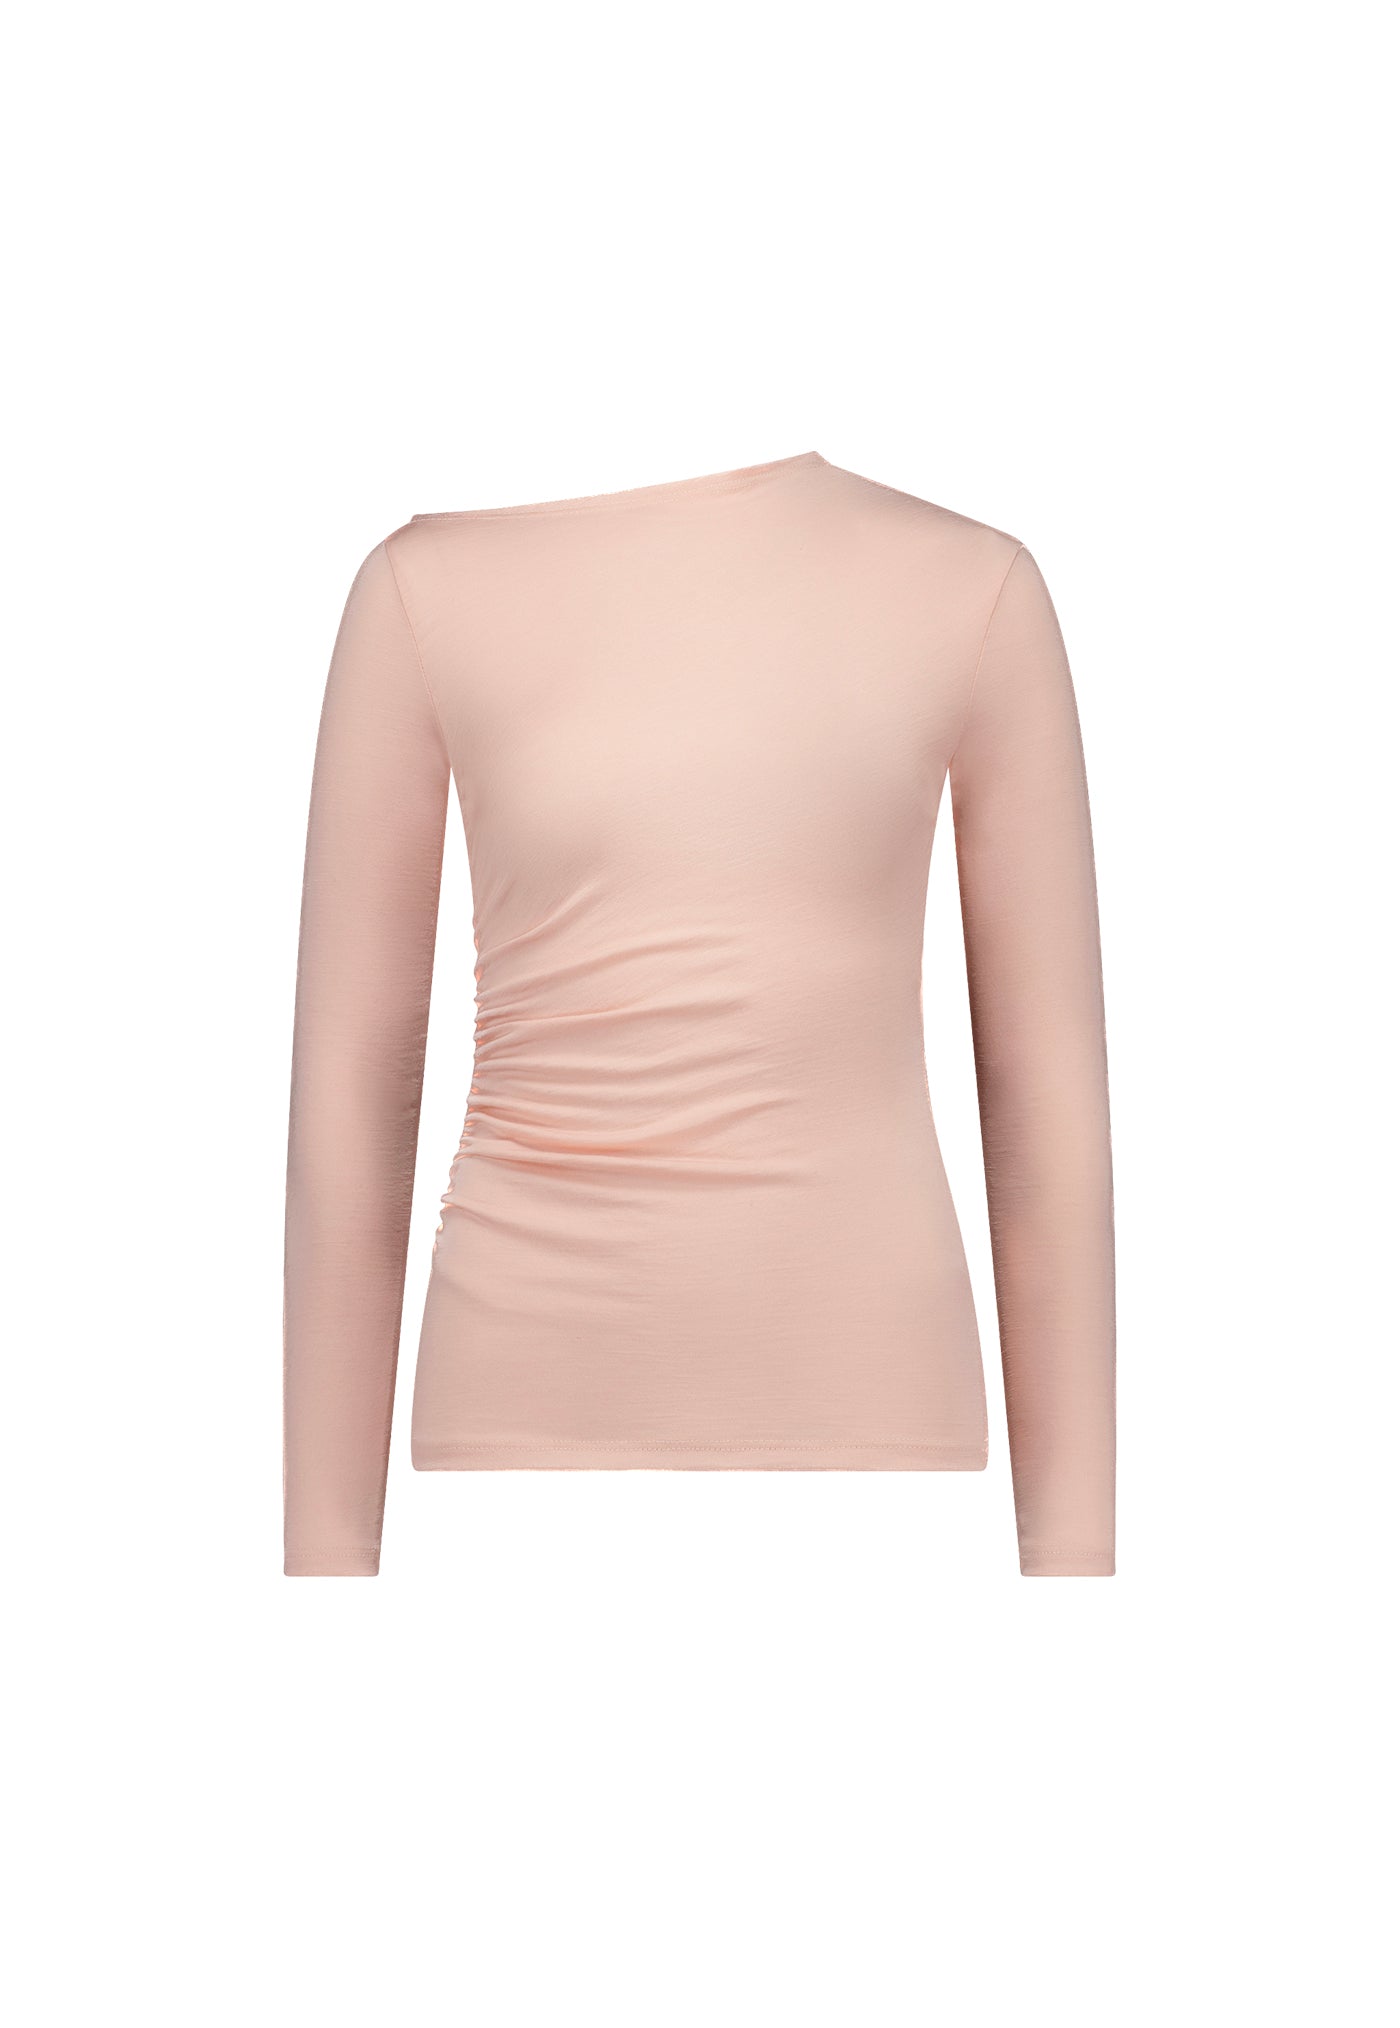 Beau Merino Knit Top - Soft Pink sold by Angel Divine